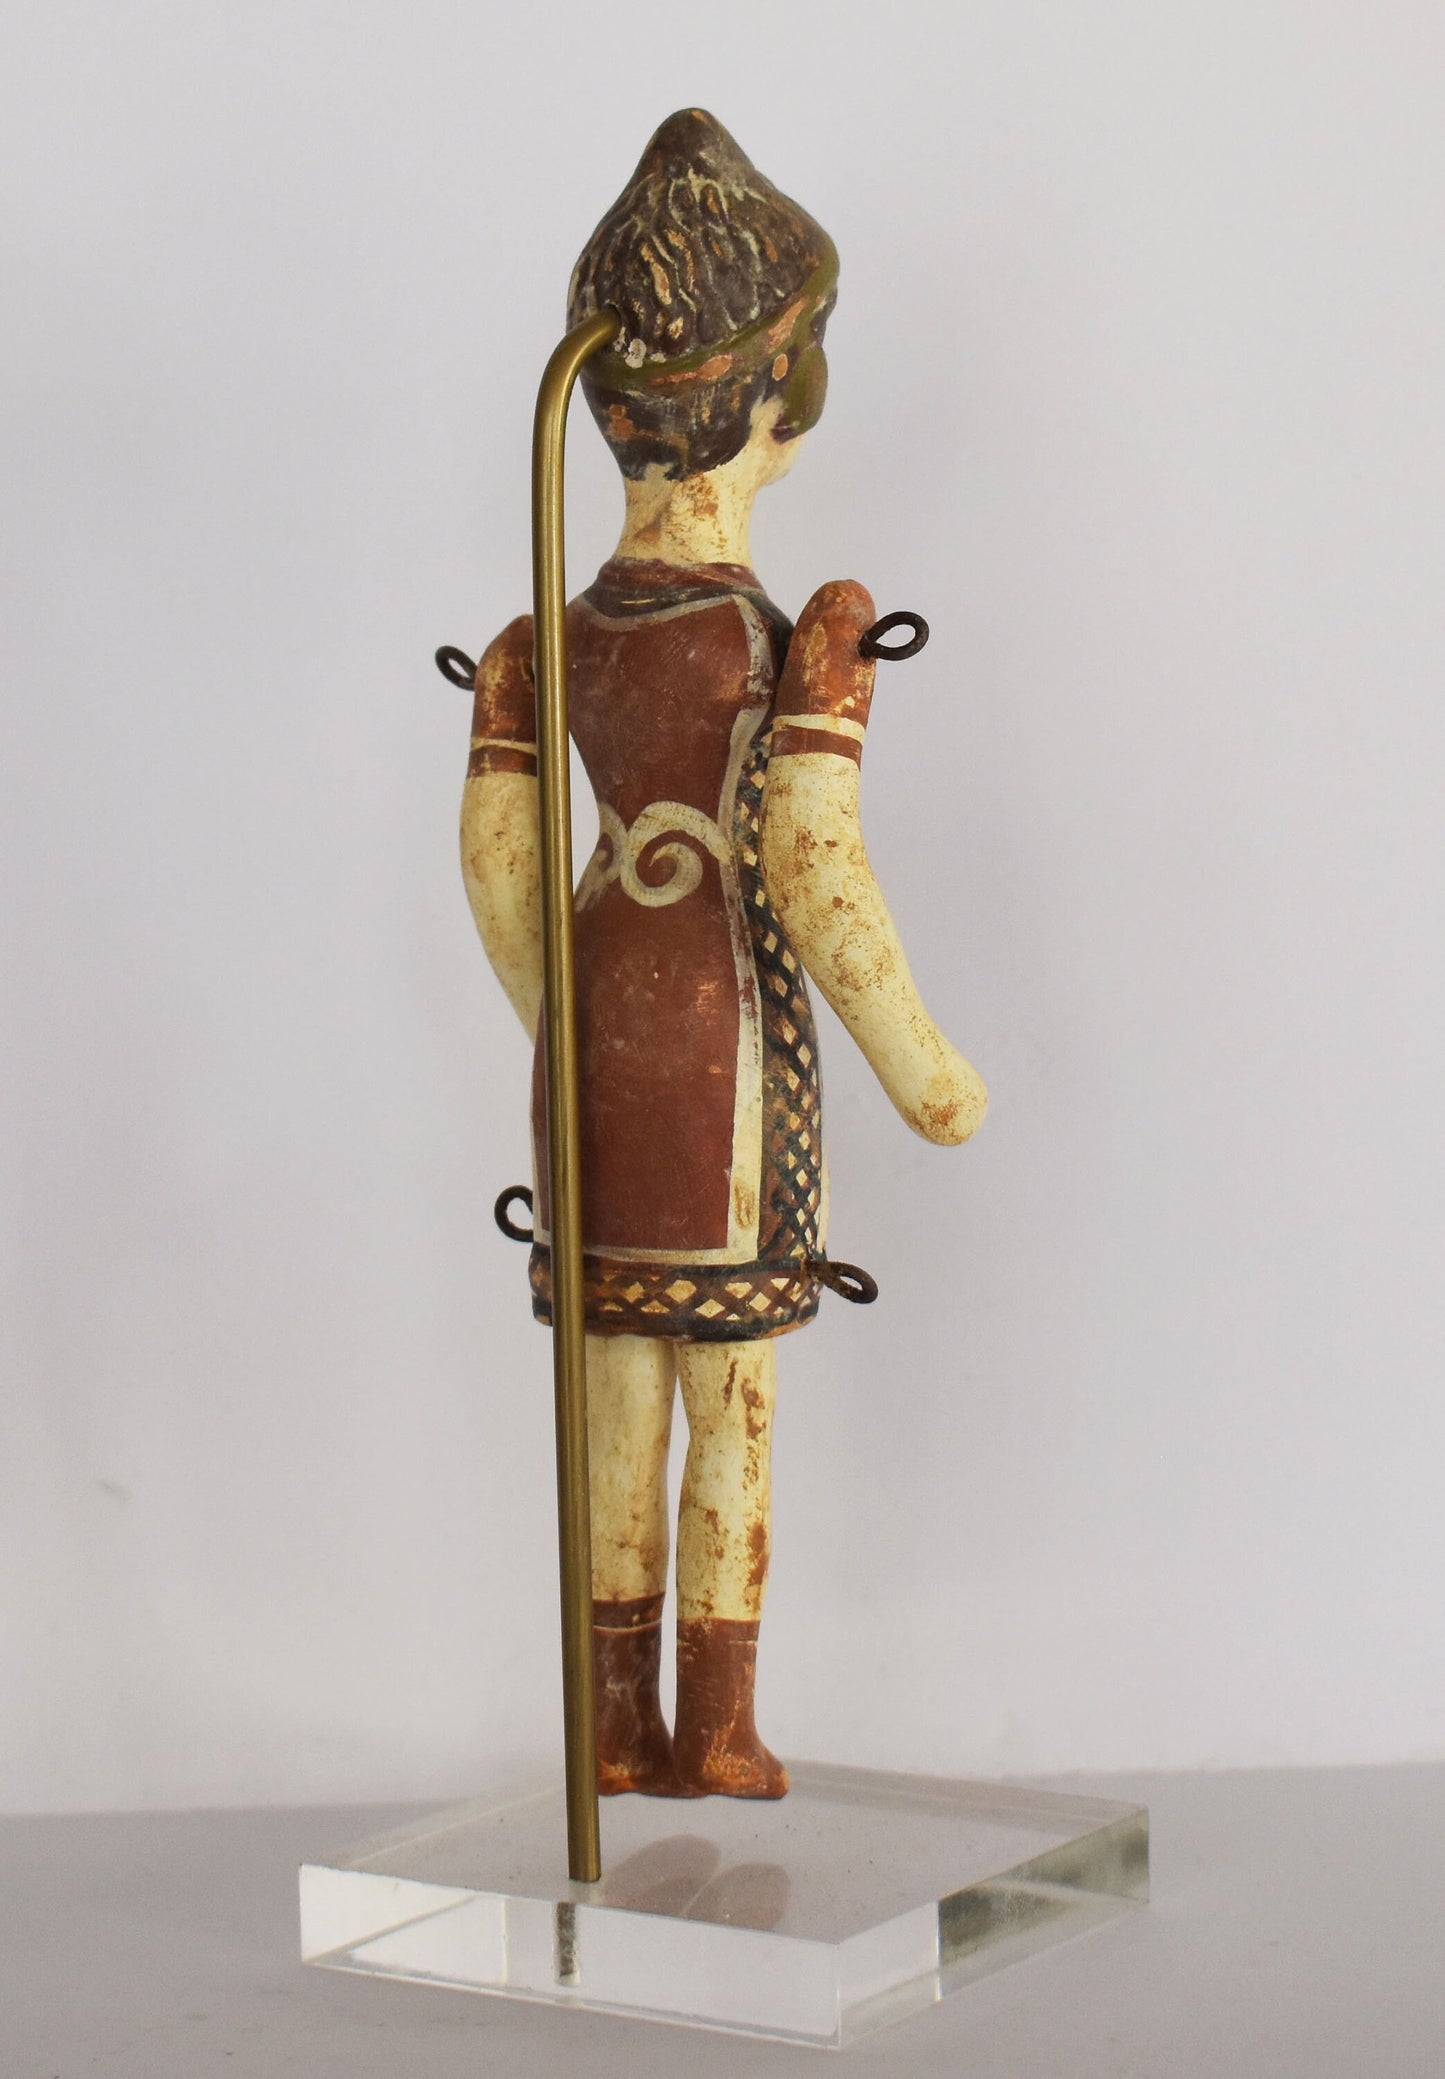 Joined Doll - Figurine - Ancient Greece - Children's Toy, Charm, Protective Role - Plexiglass Base - Ceramic Artifact